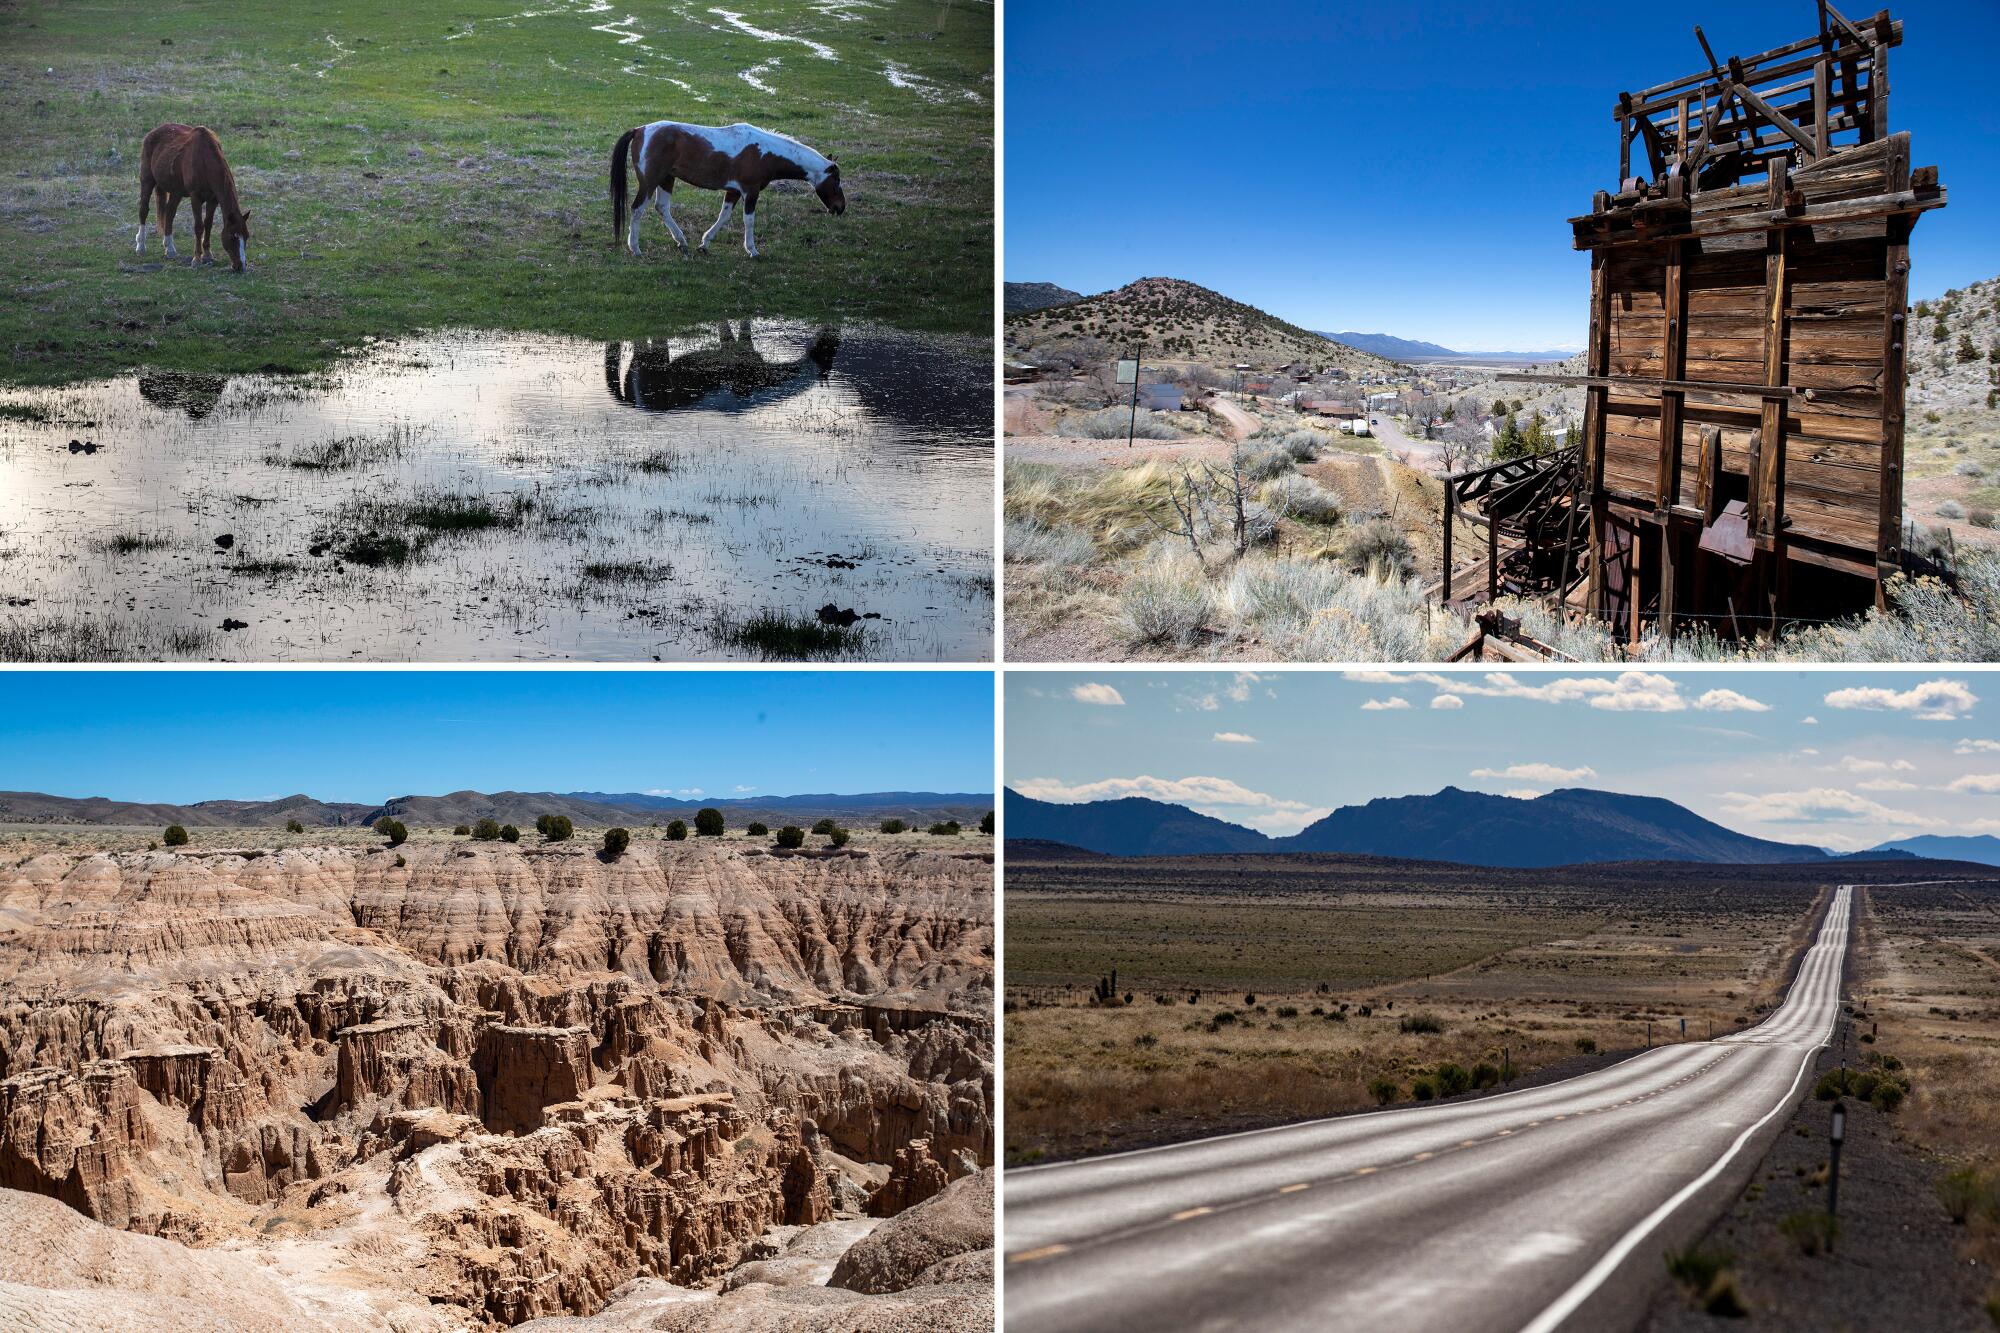 Clockwise from top left: Horses graze in a field along Highway 93 in Alamo, Nev.; the 1920s-era Pioche Mines Co.'s aerial tramway carried ore from the mines down Treasure Hill in Pioche; a desolate Highway 93 stretches for miles through the Delamar Valley; and eroded sandstone cliffs at Cathedral Gorge State Park on Highway 93 in Pioche.